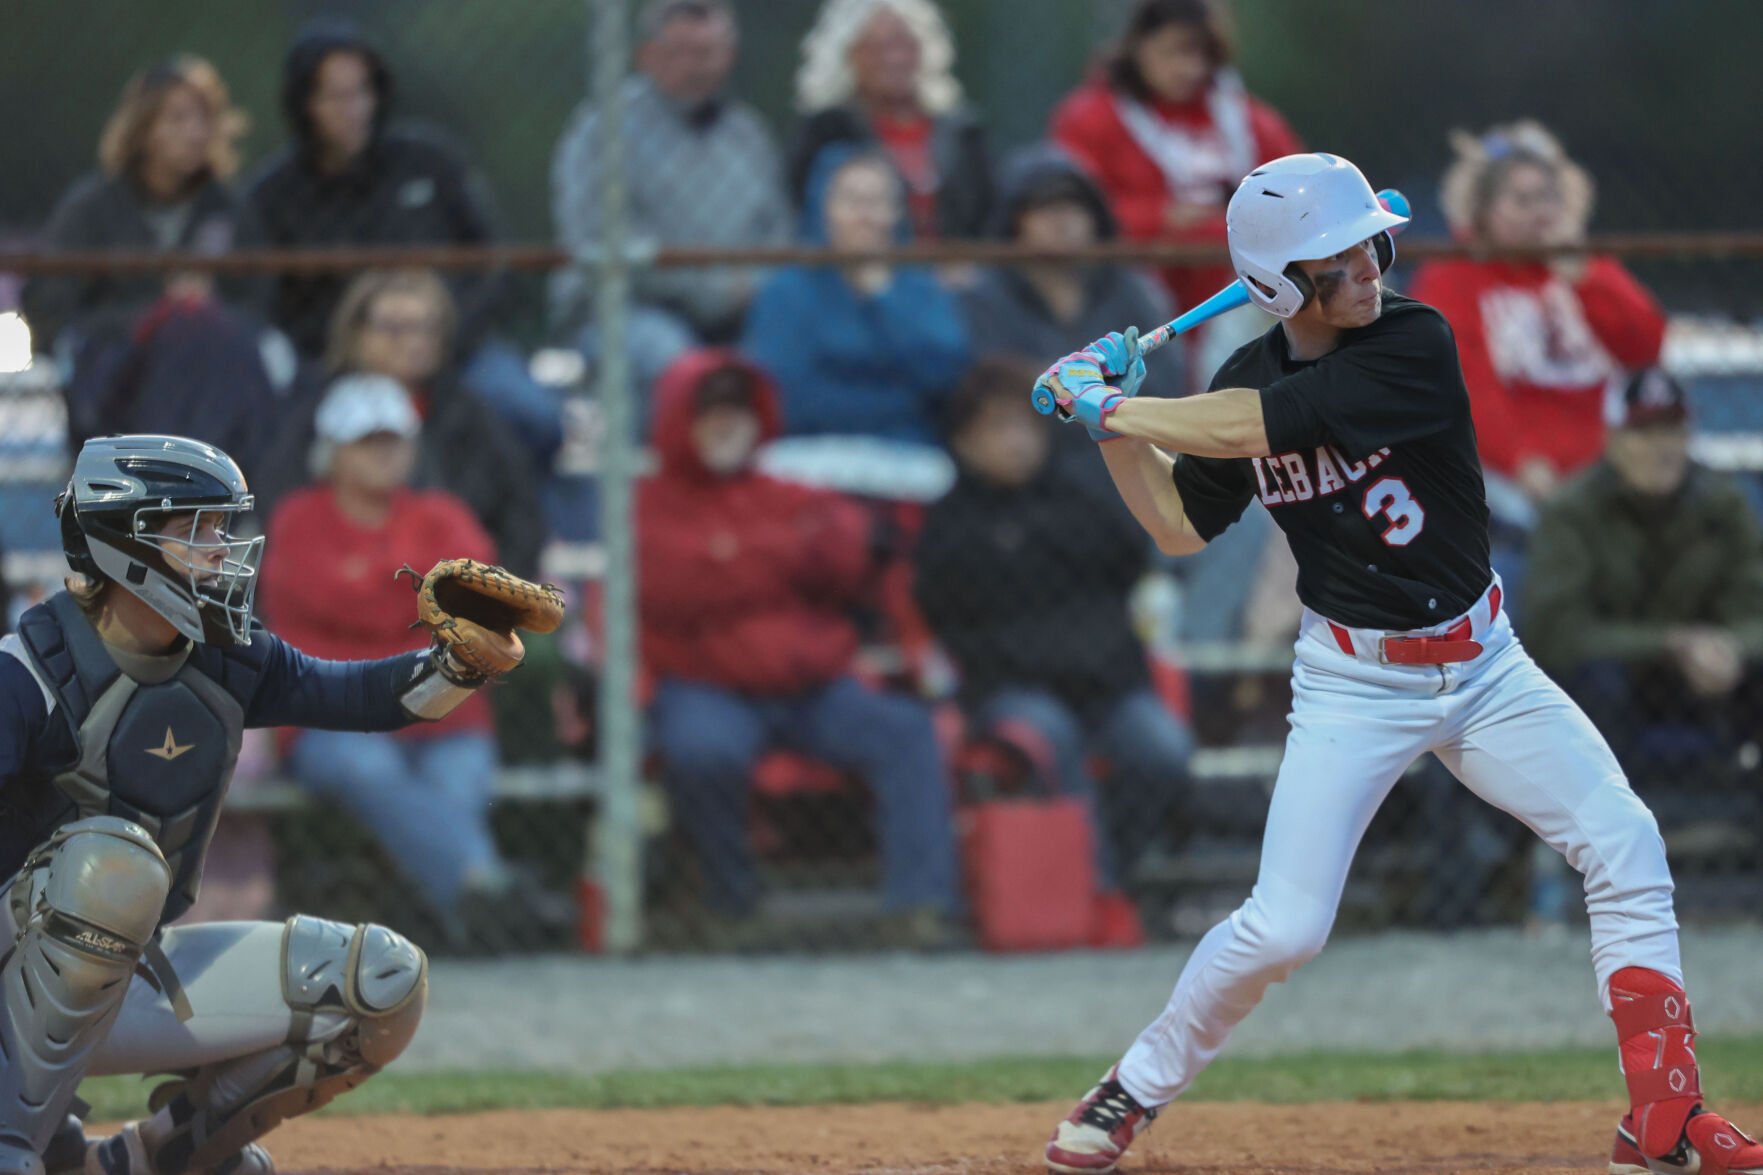 PREP BASEBALL: Lebanon powers past Richlands in meeting of Southwest District leaders